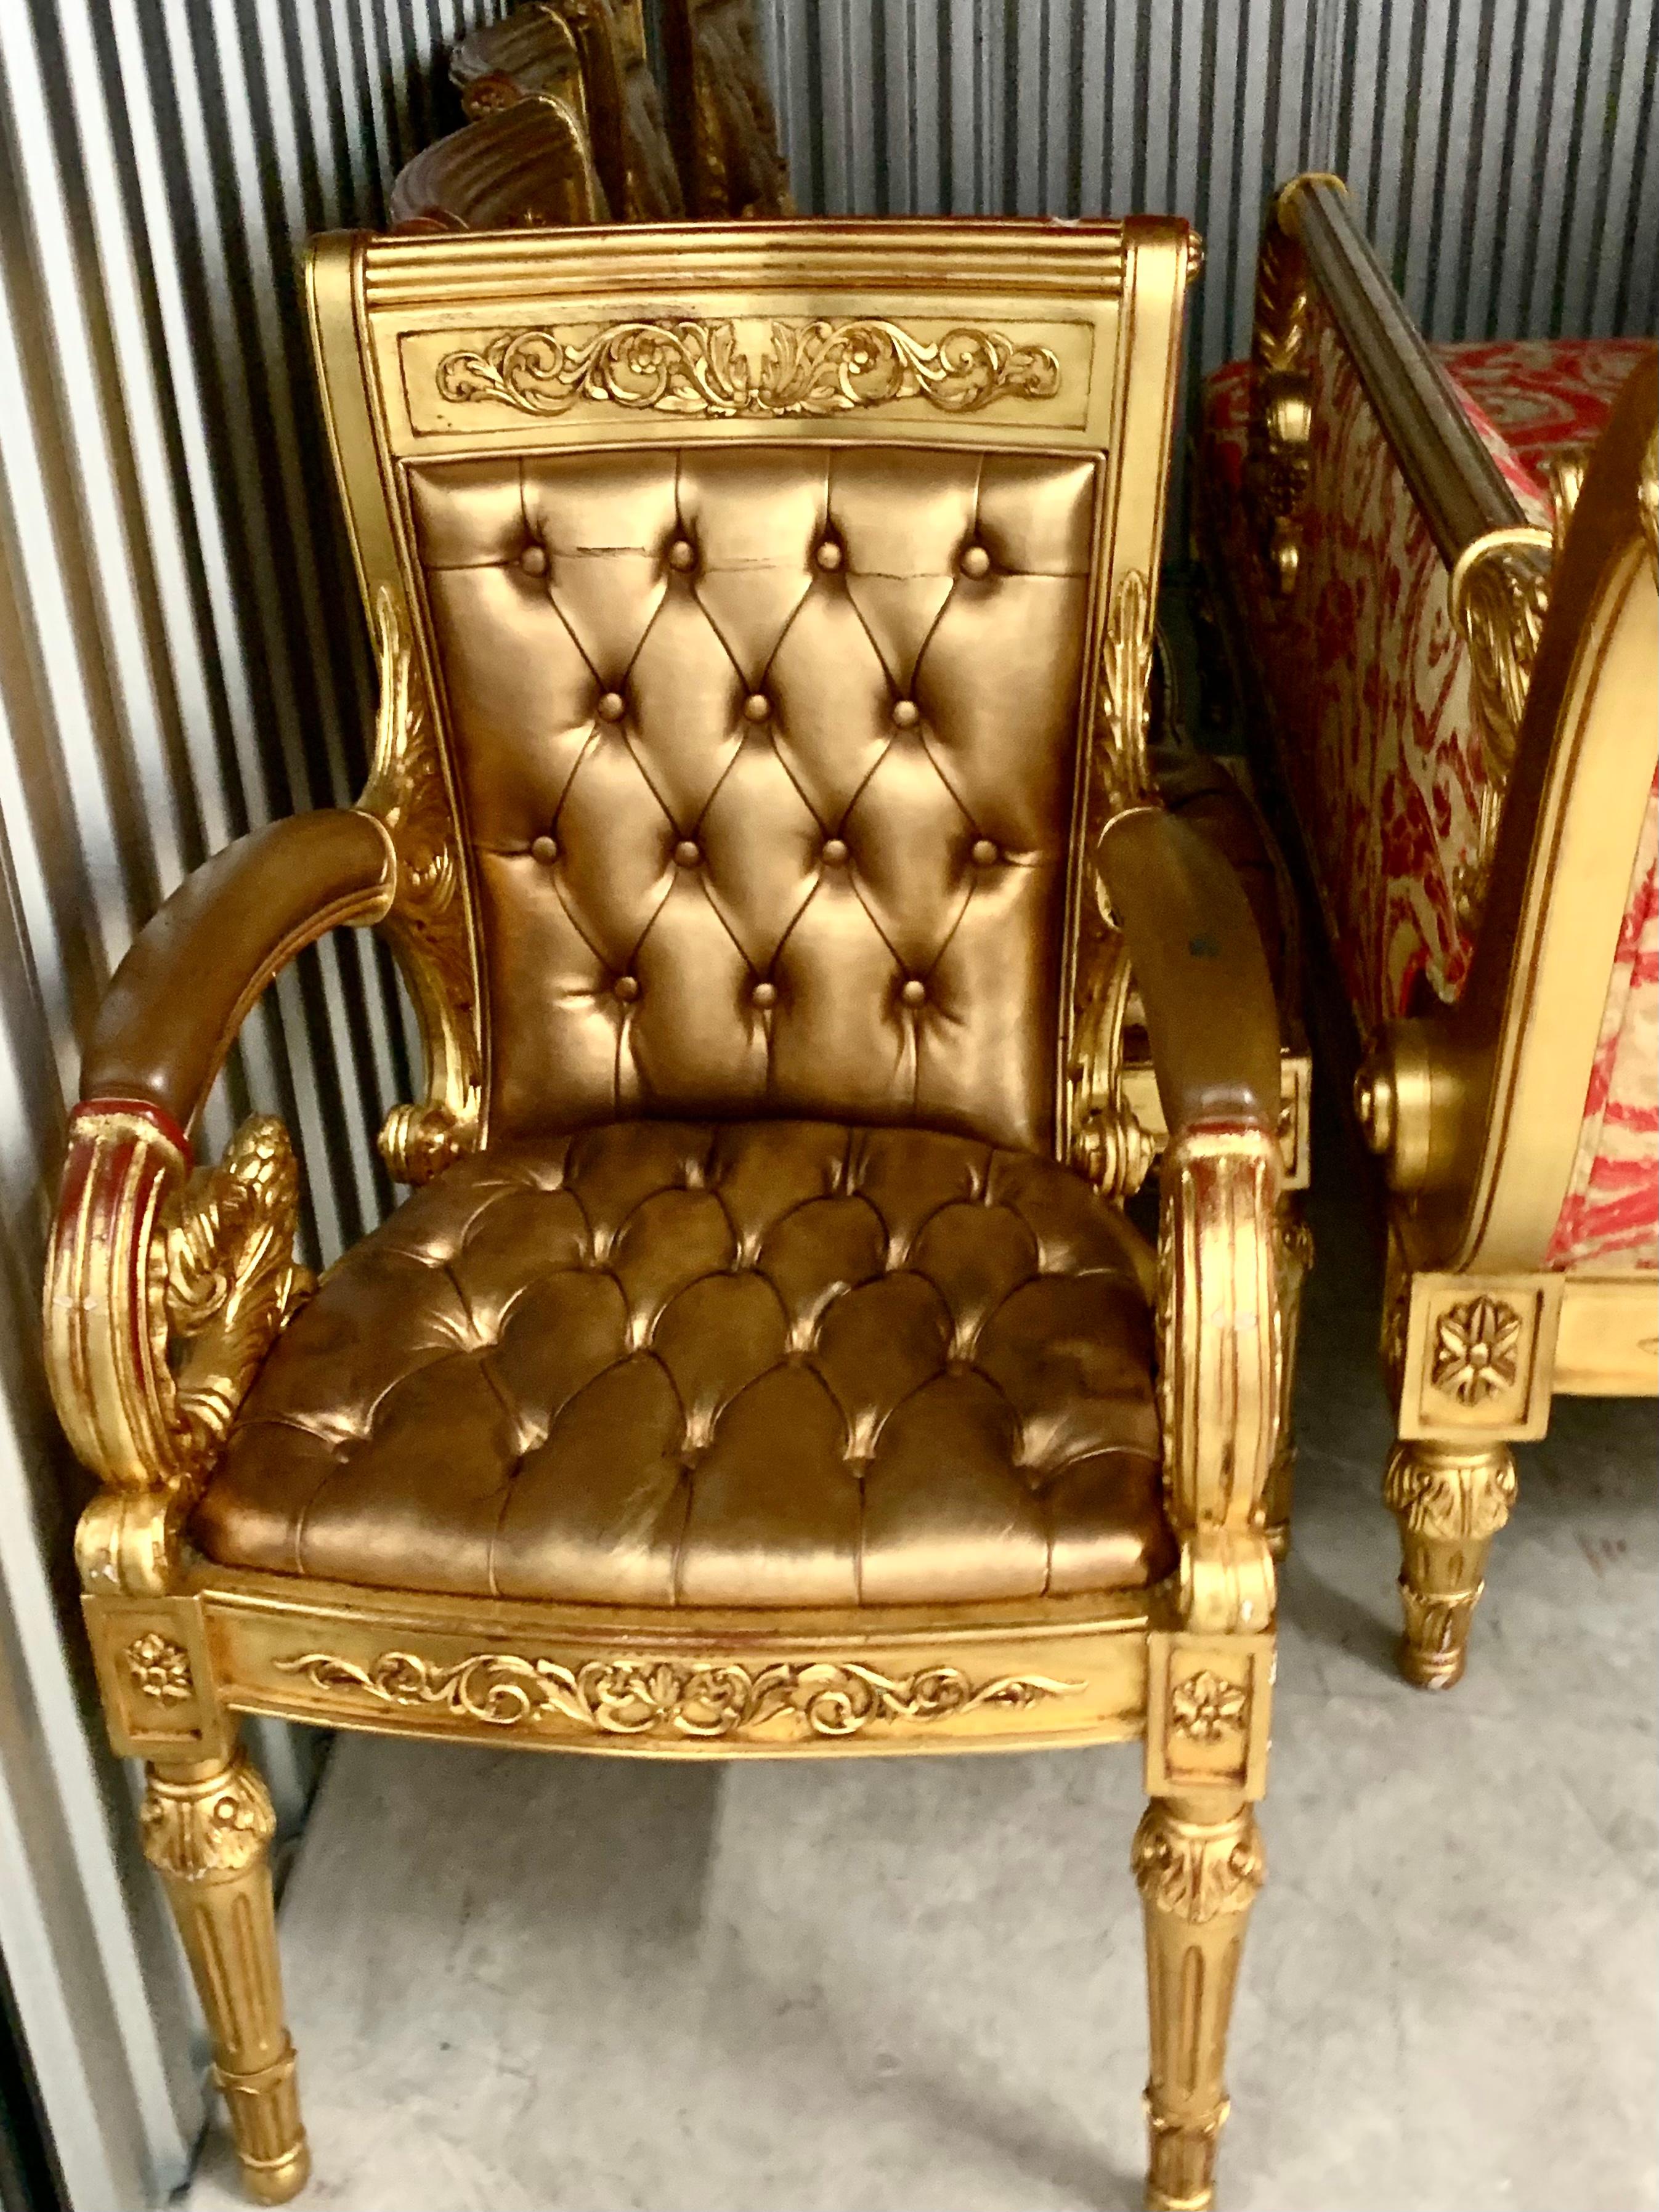 Versace Vanitas gilt, hand-carved armchair, Gianni Versace, 1994. Listing is for single chair. The shape of the Vanitas took inspiration from a Louis XV chair bought by Gianni Versace from a French antique dealer for his house in Miami. It became